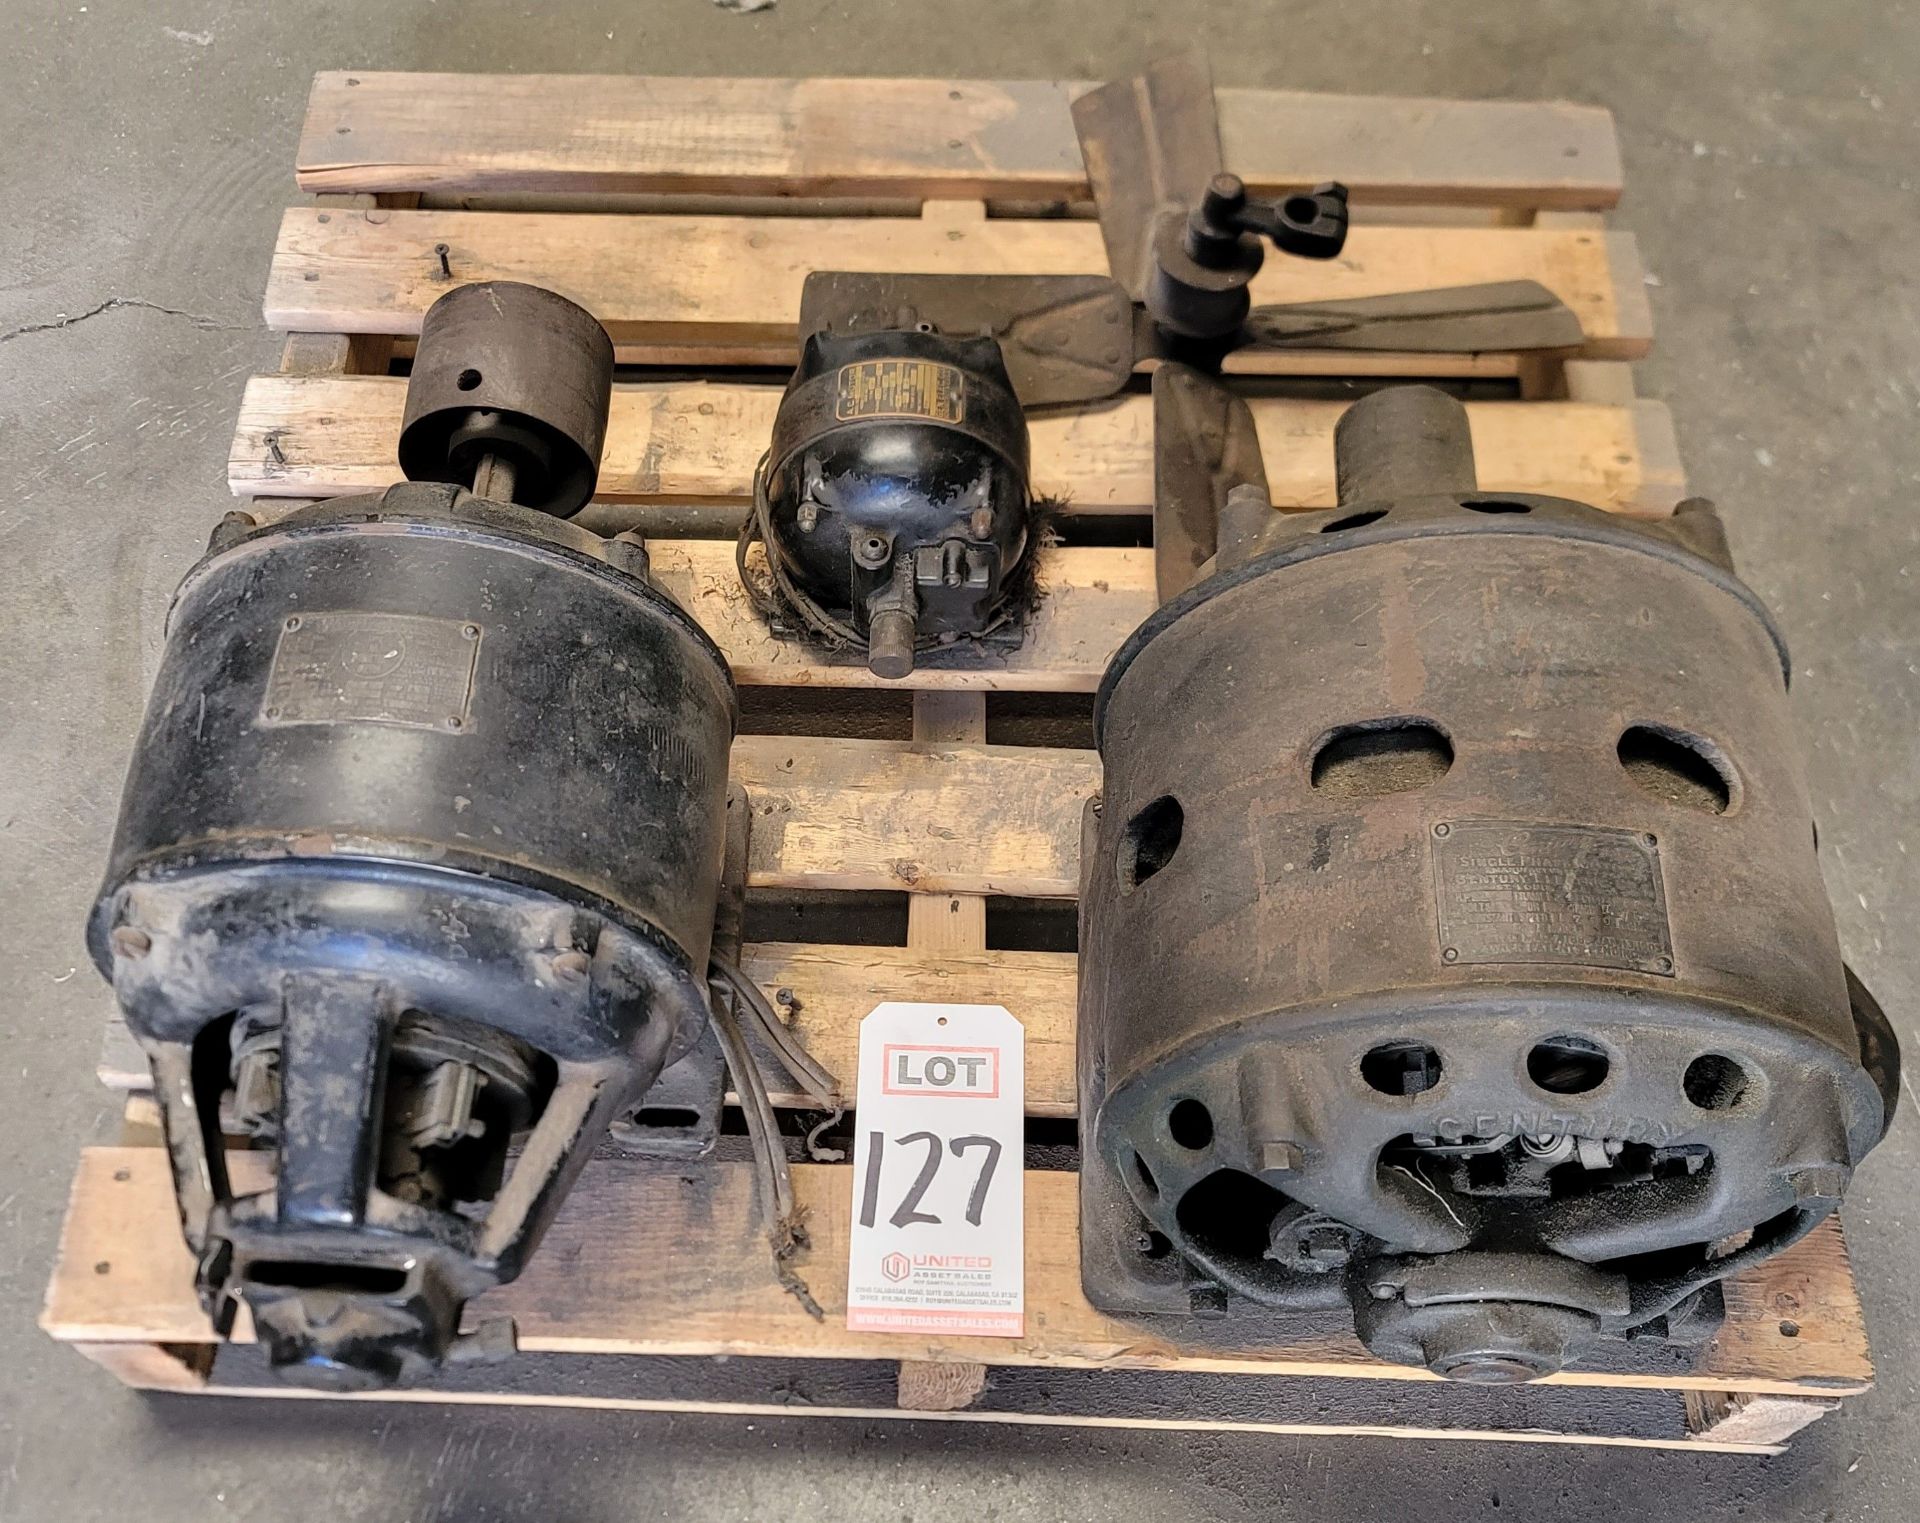 LOT - (3) OLD ELECTRIC MOTORS: (1) CENTURY SINGLE PHASE, 1 HP, 1750 RPM, (1) WESTINGHOUSE 1 HP, 1450